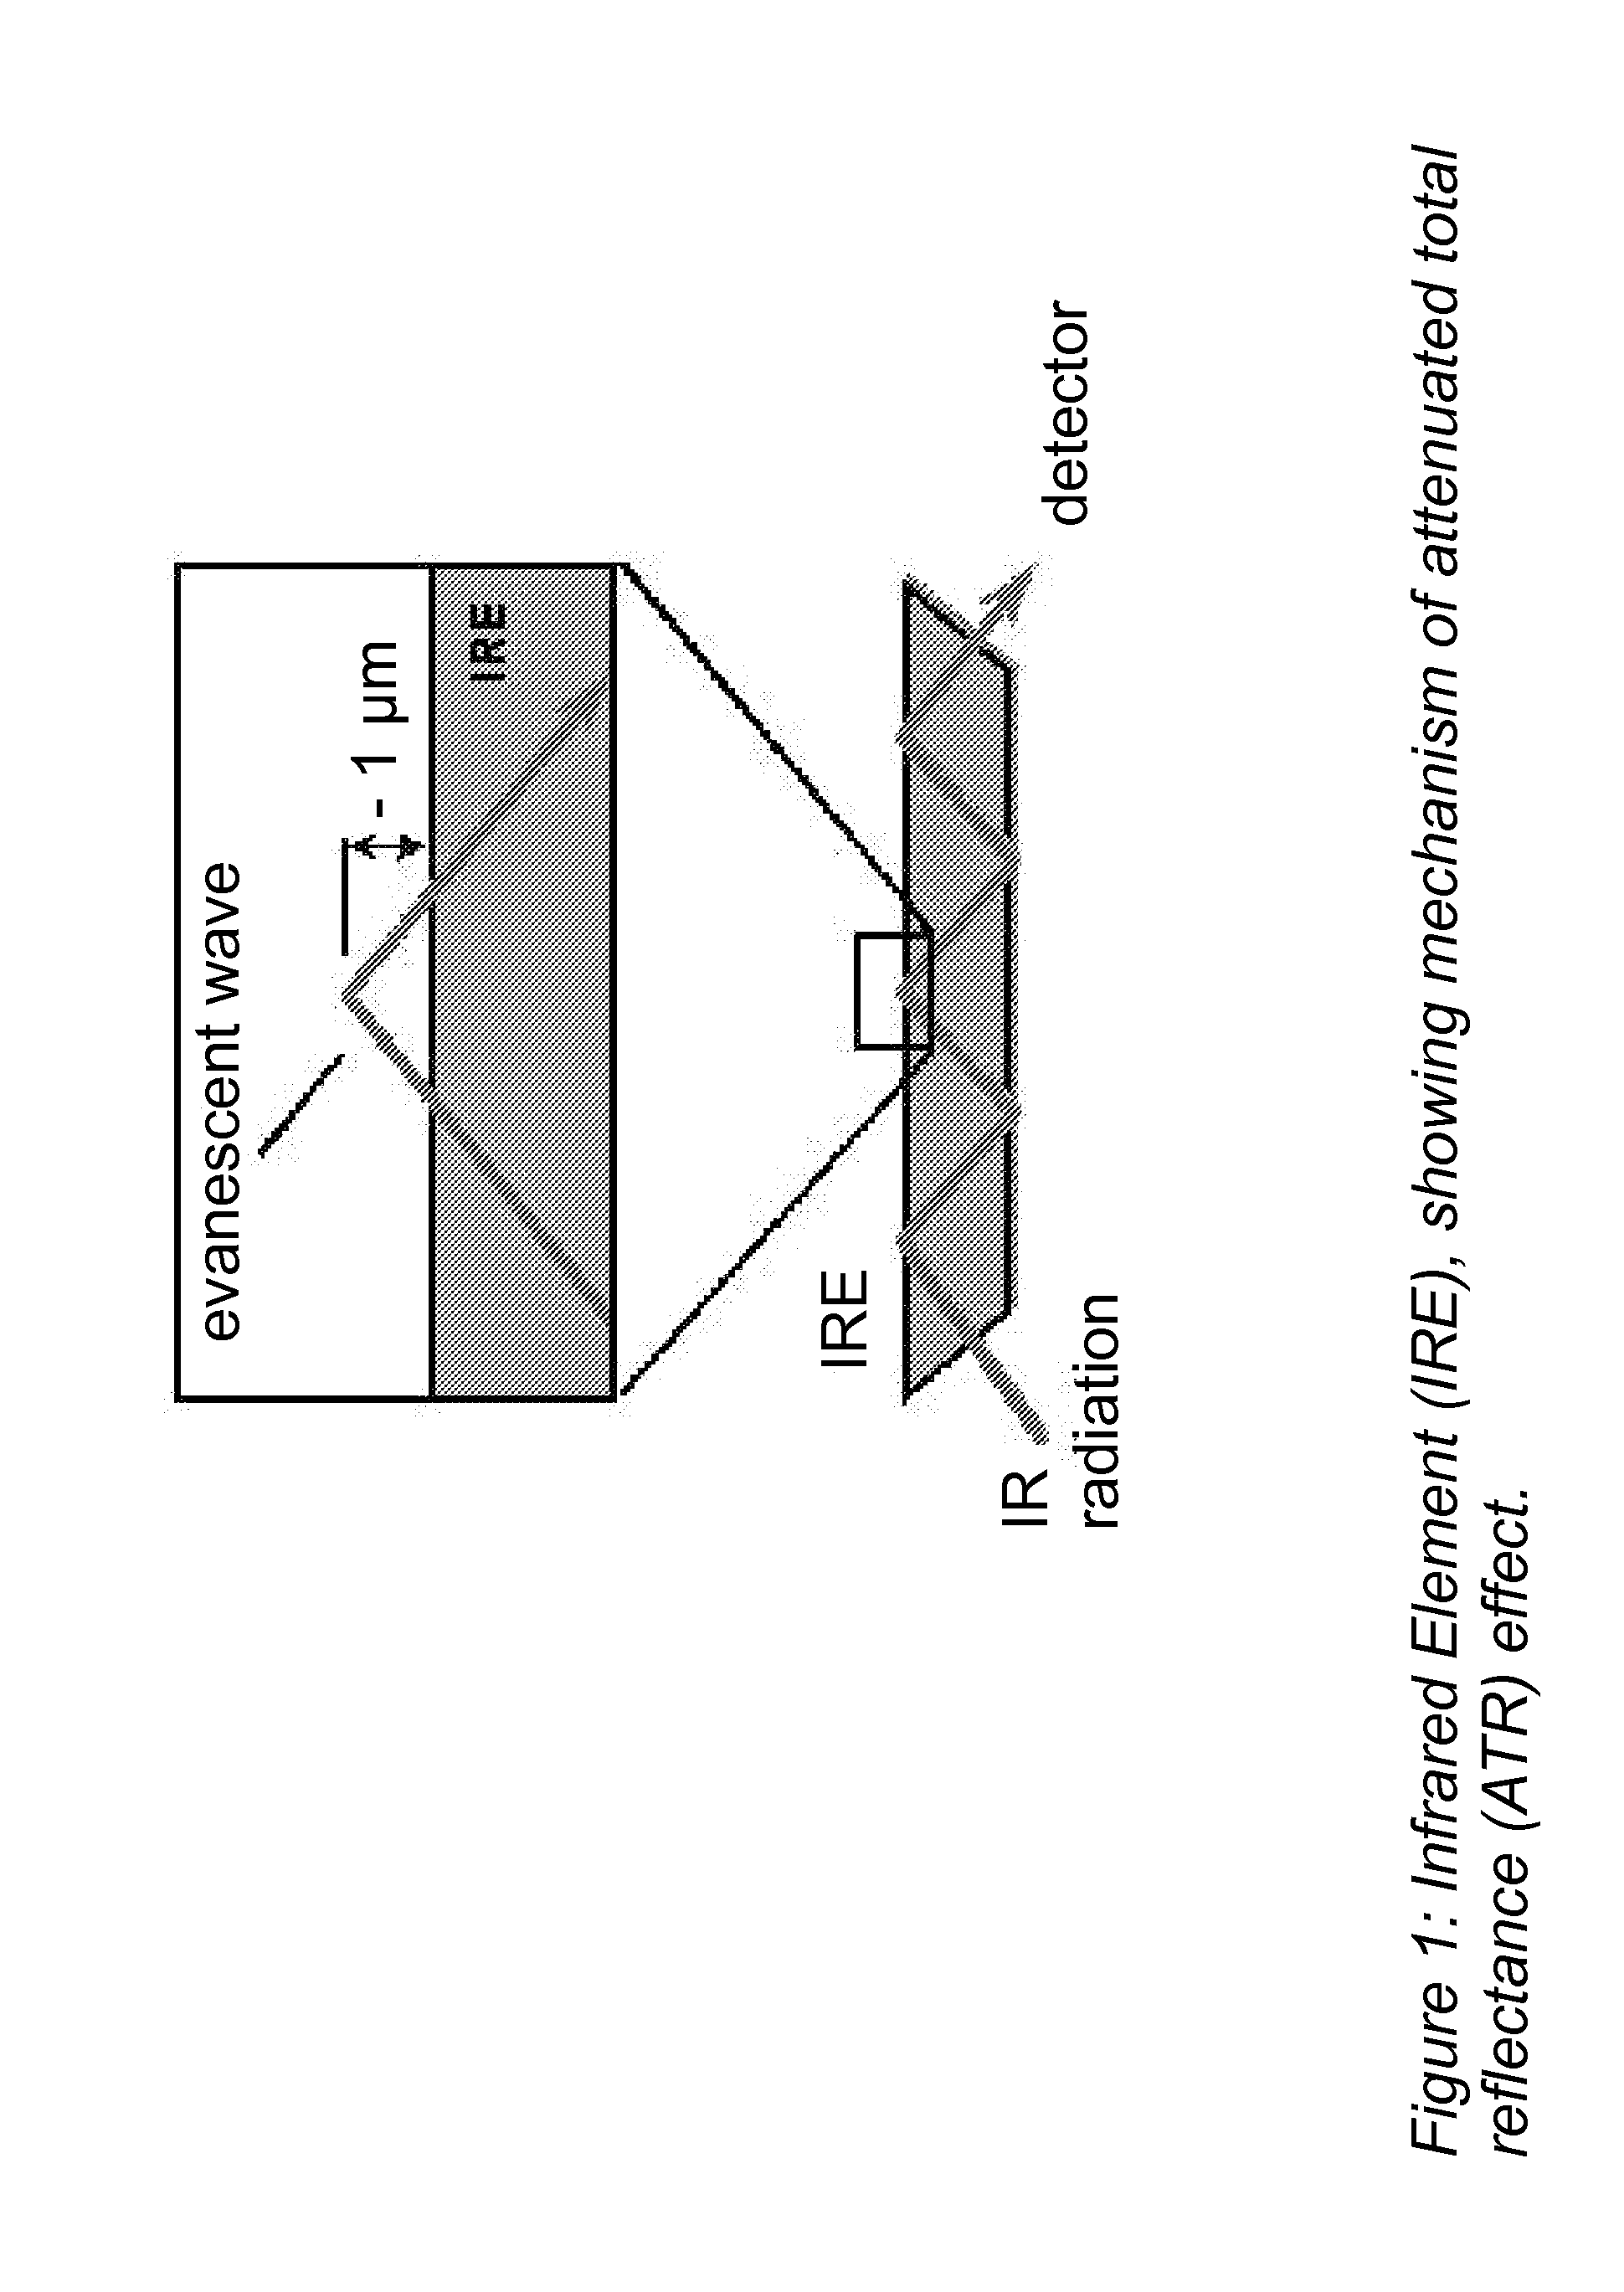 Method for Detecting and Measuring Low Concentrations of Contaminants Using Attenuated Total Reflectance Spectroscopy in the Mid-IR Range